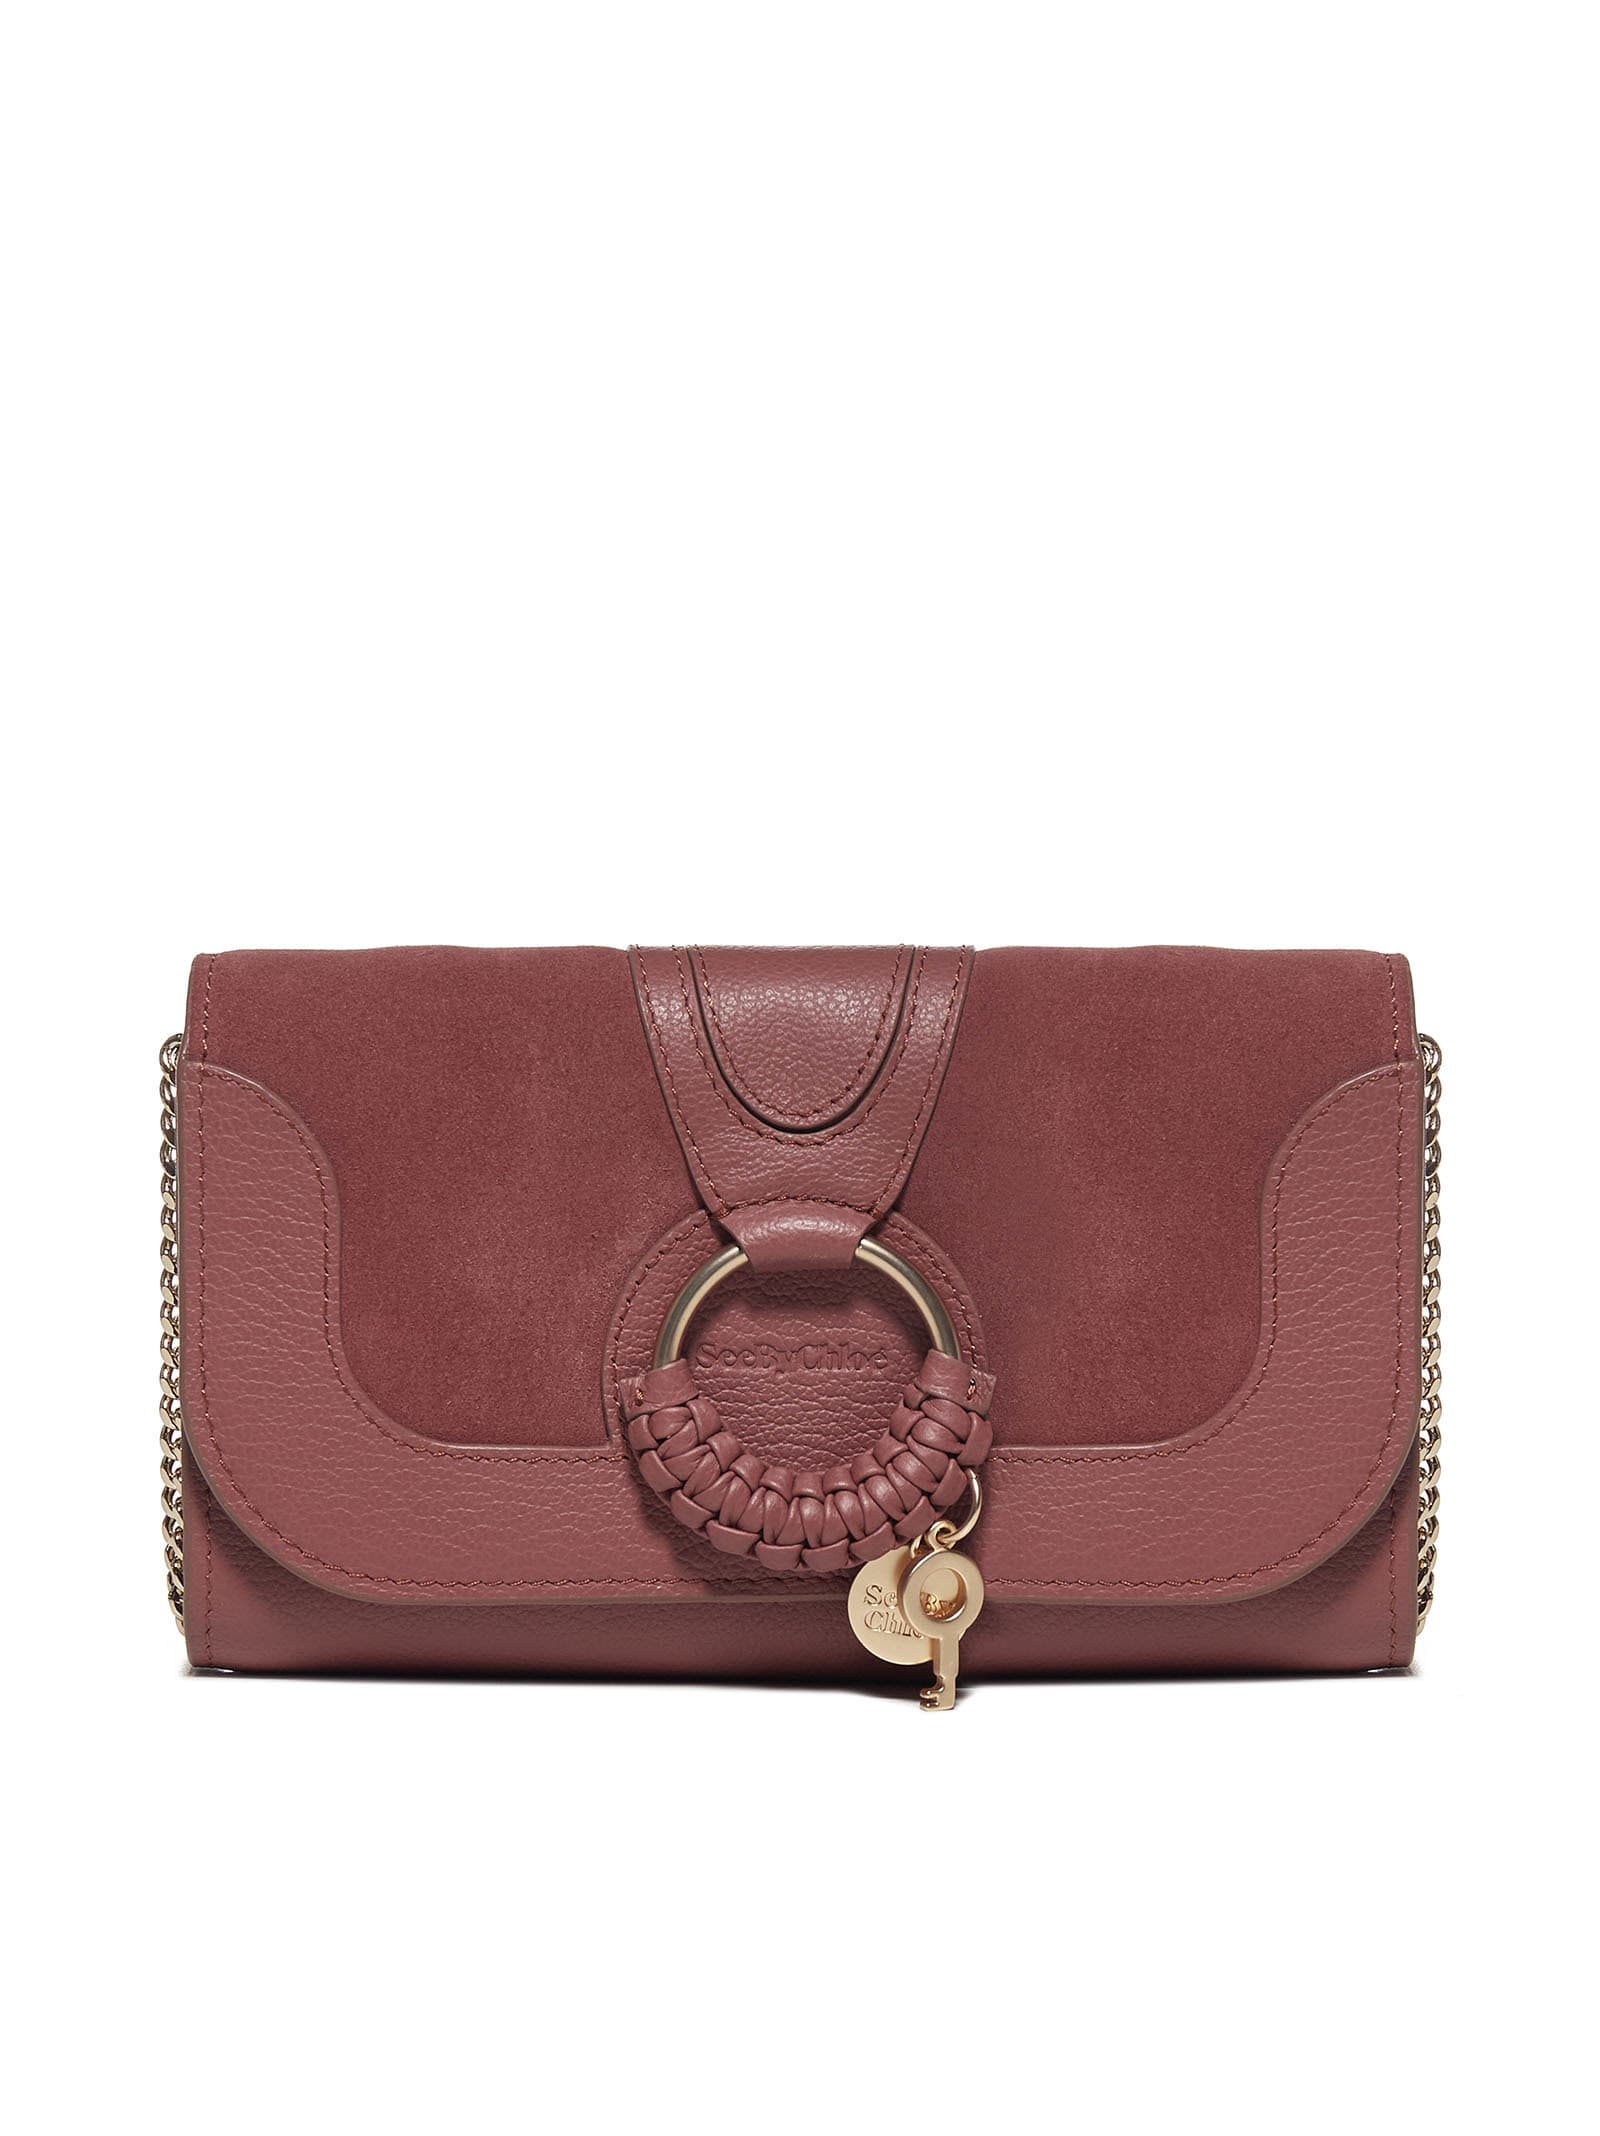 See by Chloé Hana Phone Wallet Leather And Suede Bag